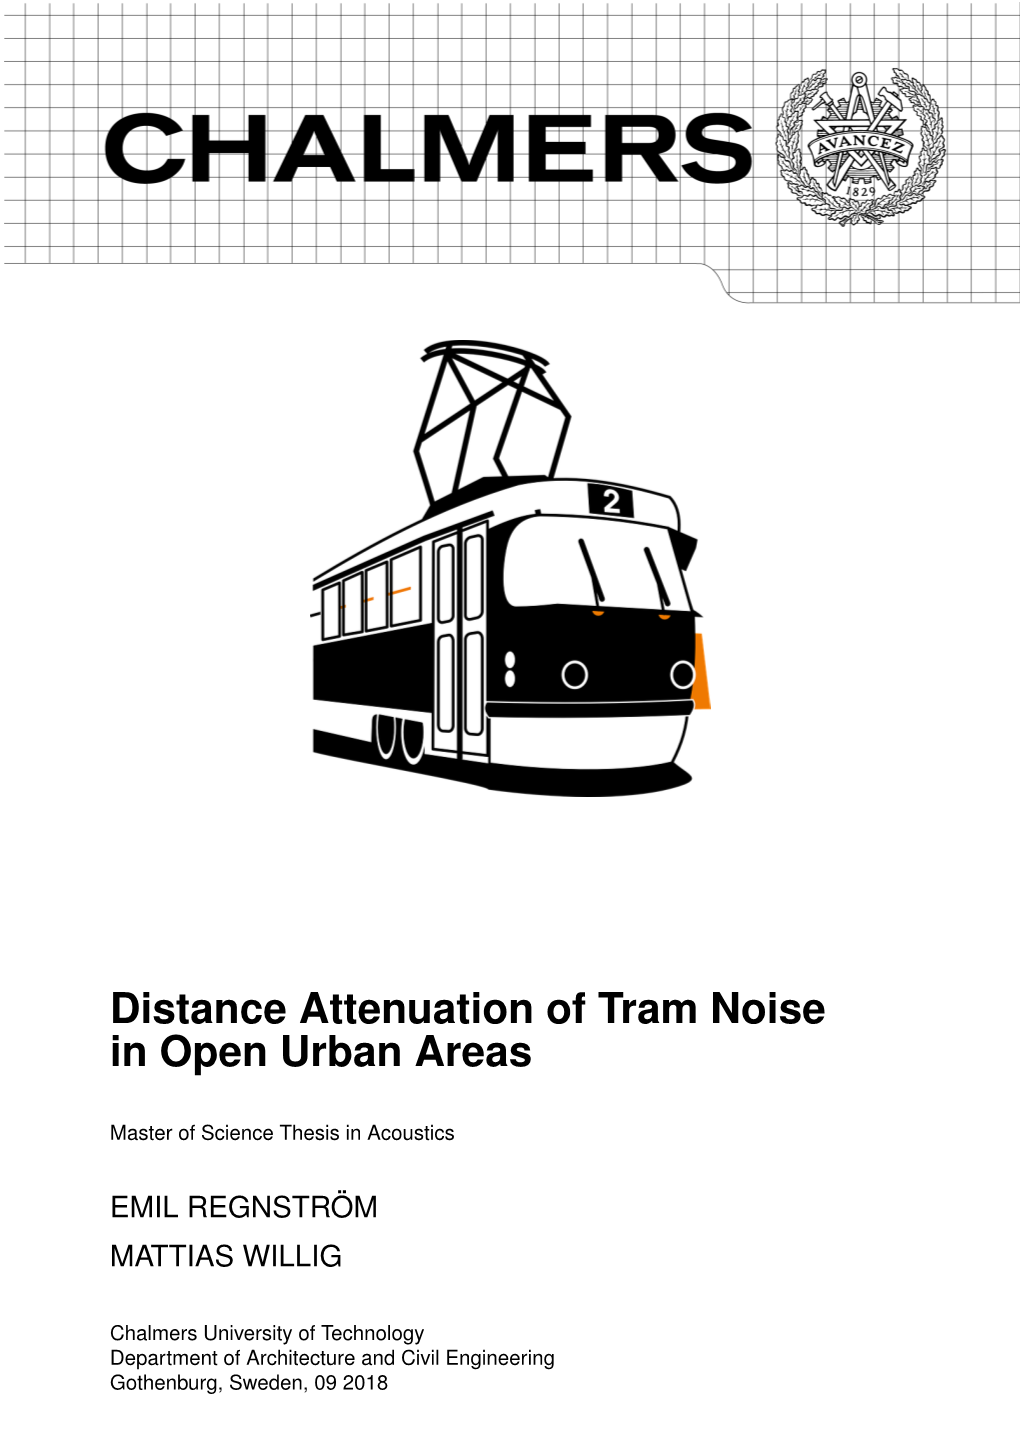 Distance Attenuation of Tram Noise in Open Urban Areas